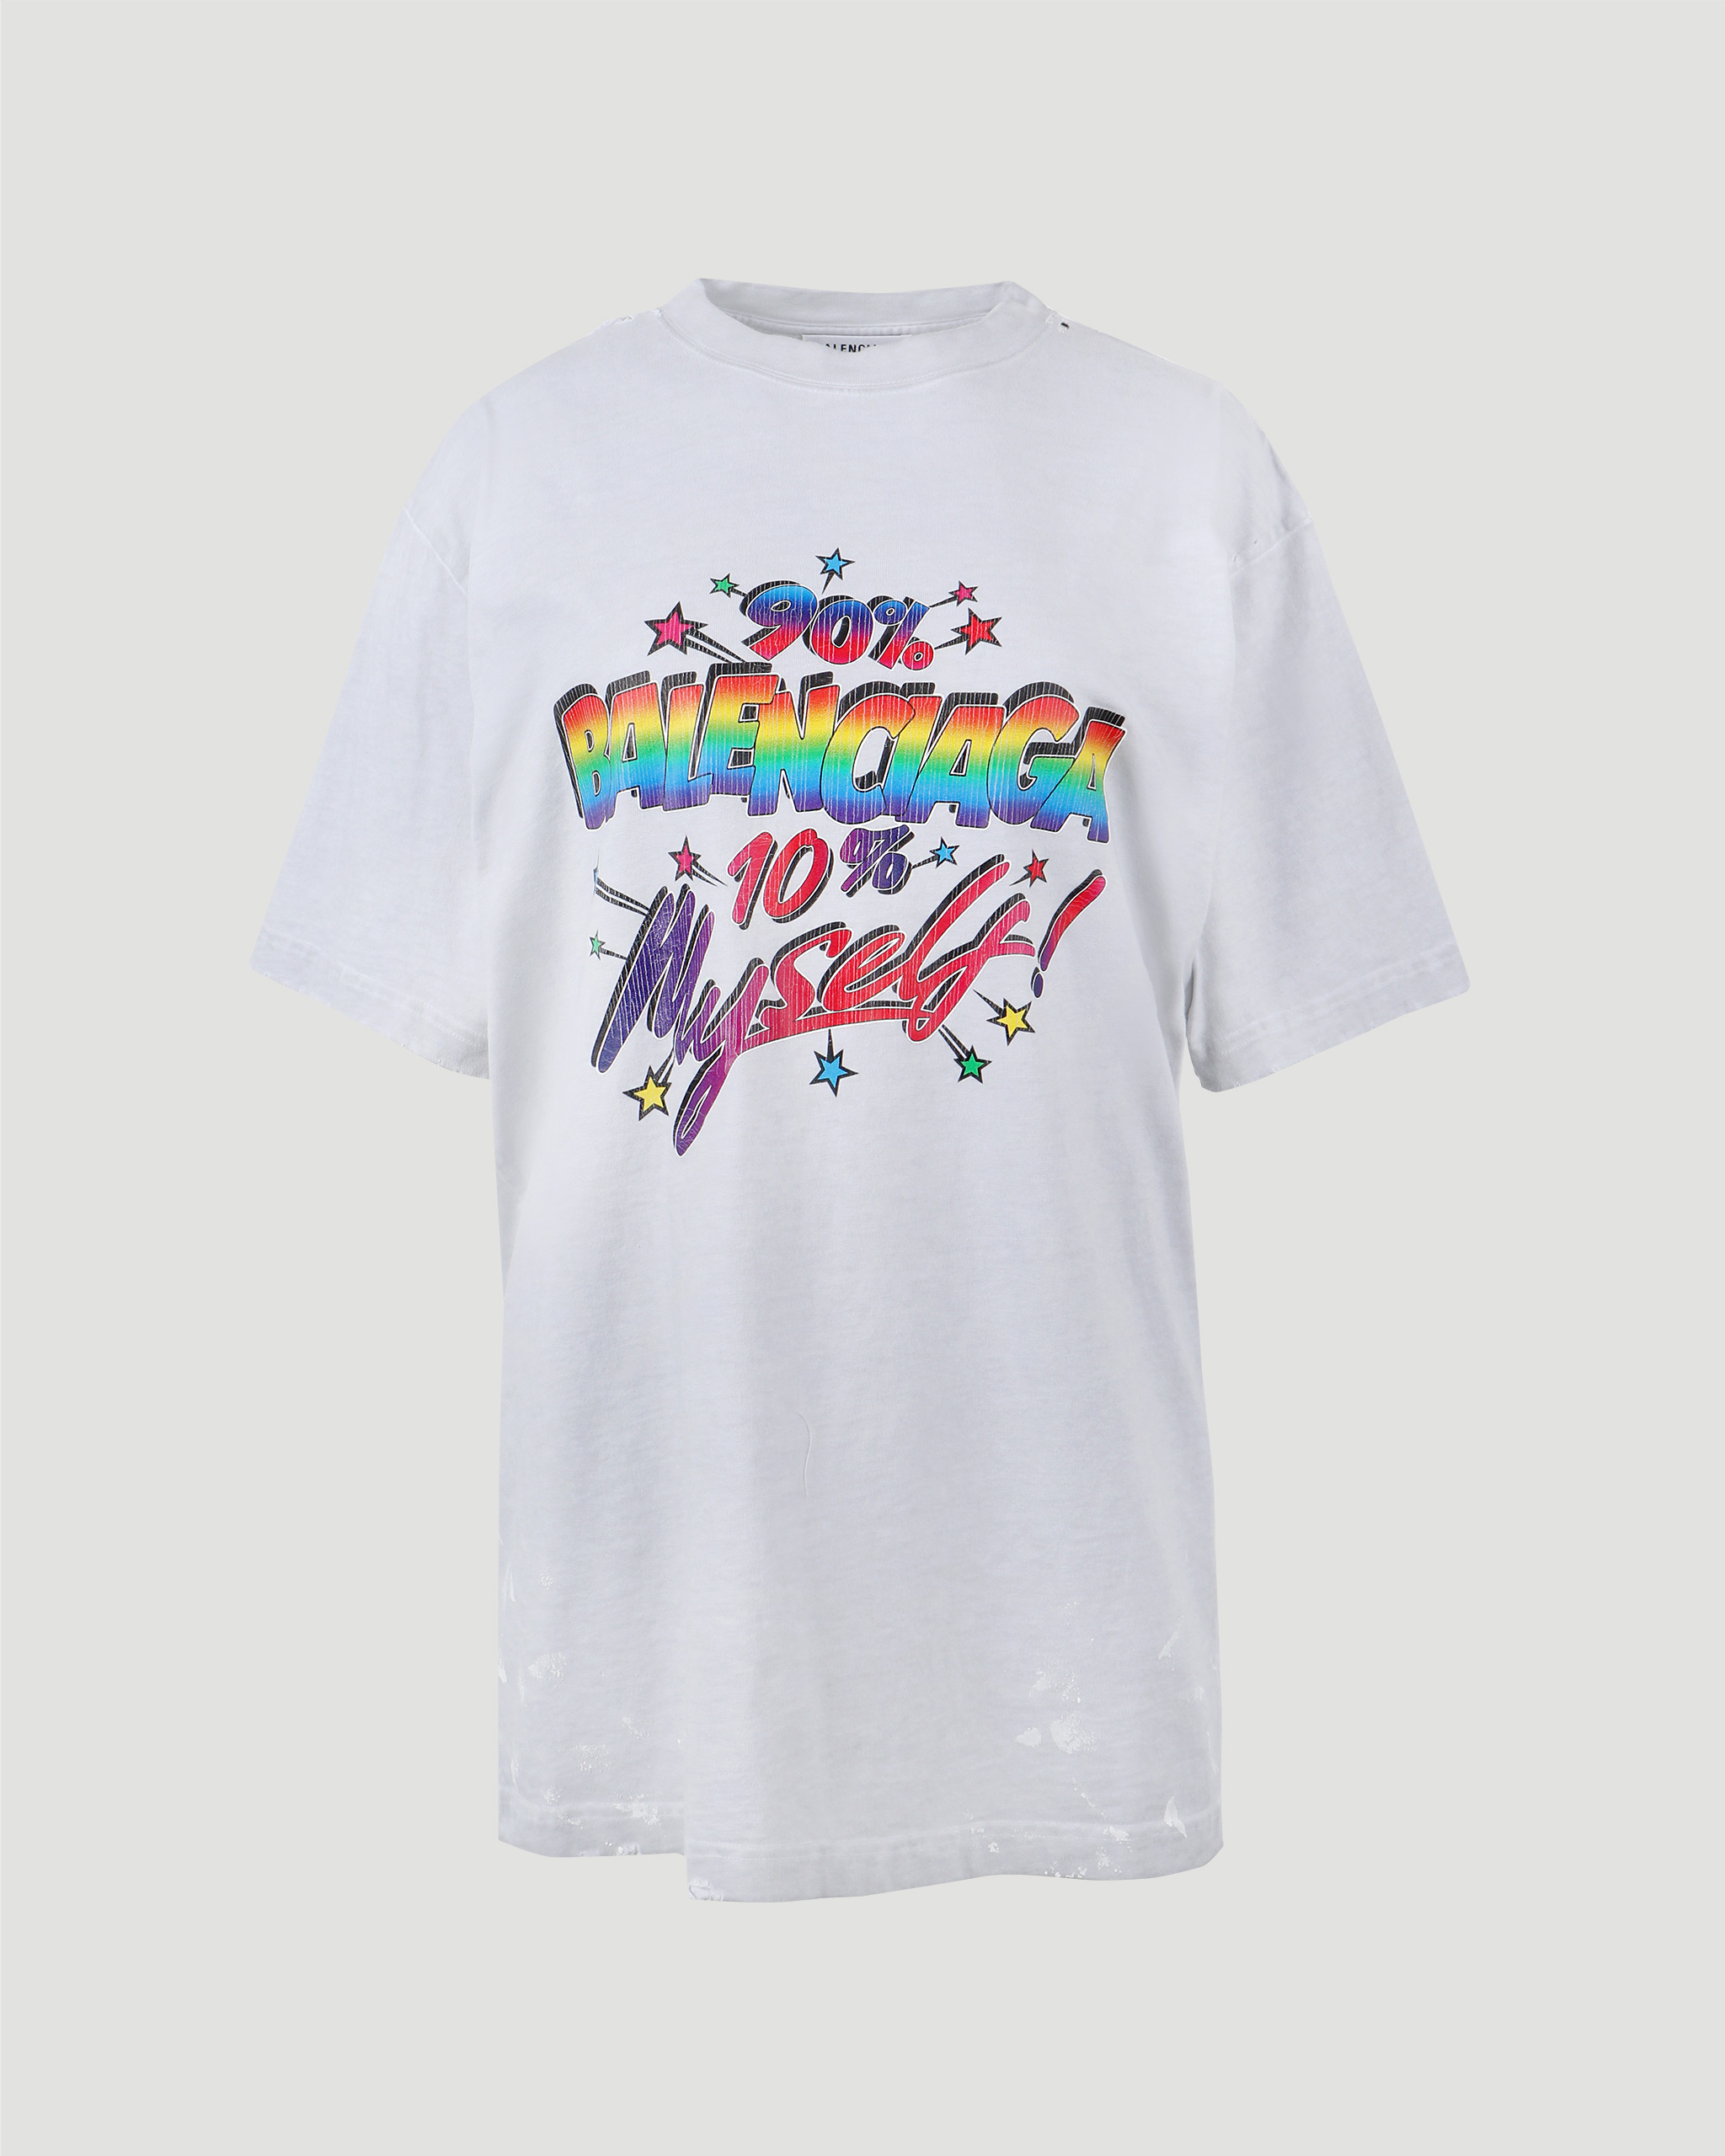 90/10 T-Shirt in white vintage jersey - All-U-Re